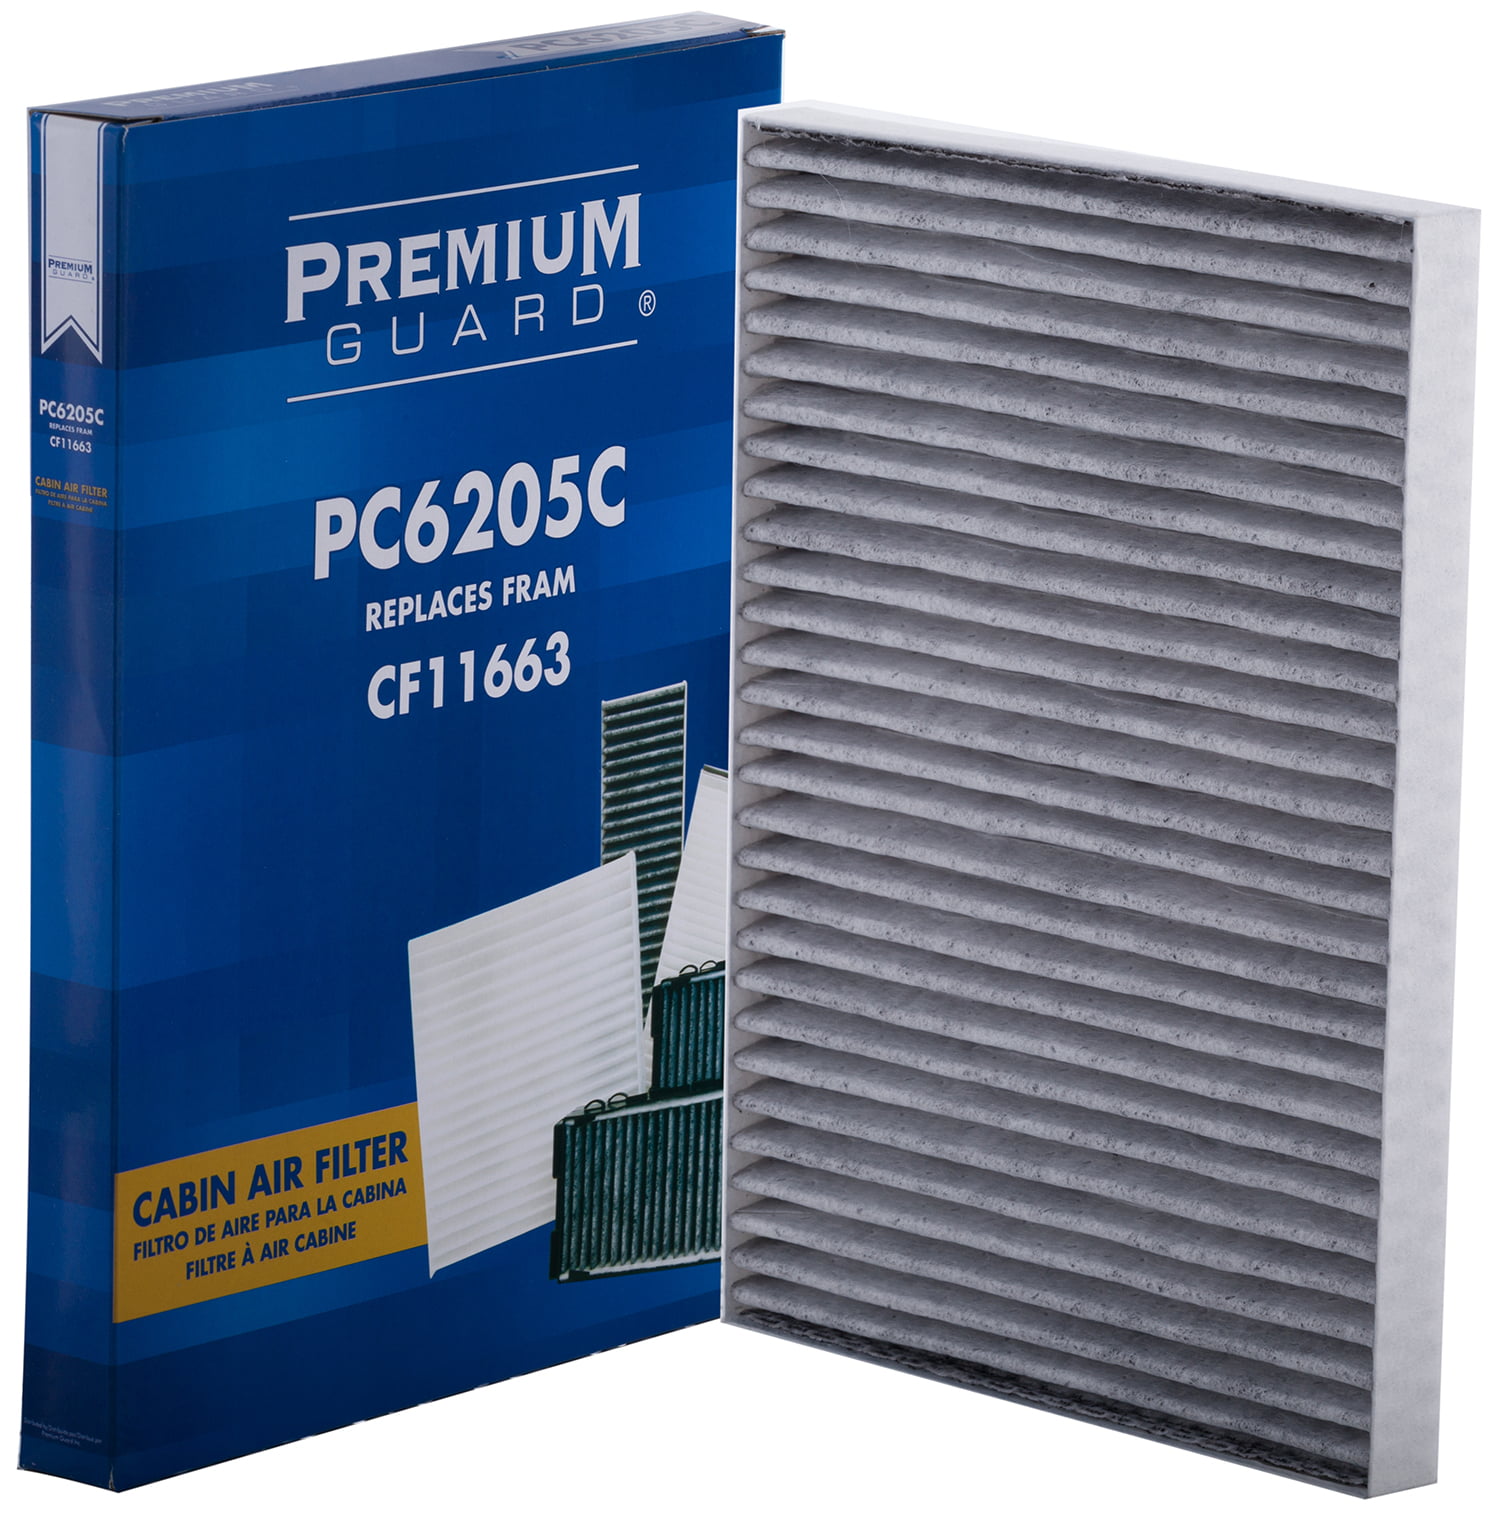 2017 Acadia Limited PG Cabin Air Filter PC6205C|Fits 2008-17 Buick Enclave 2009-17 Chevrolet Traverse 2007-10 Saturn Outlook 2007-16 GMC Acadia